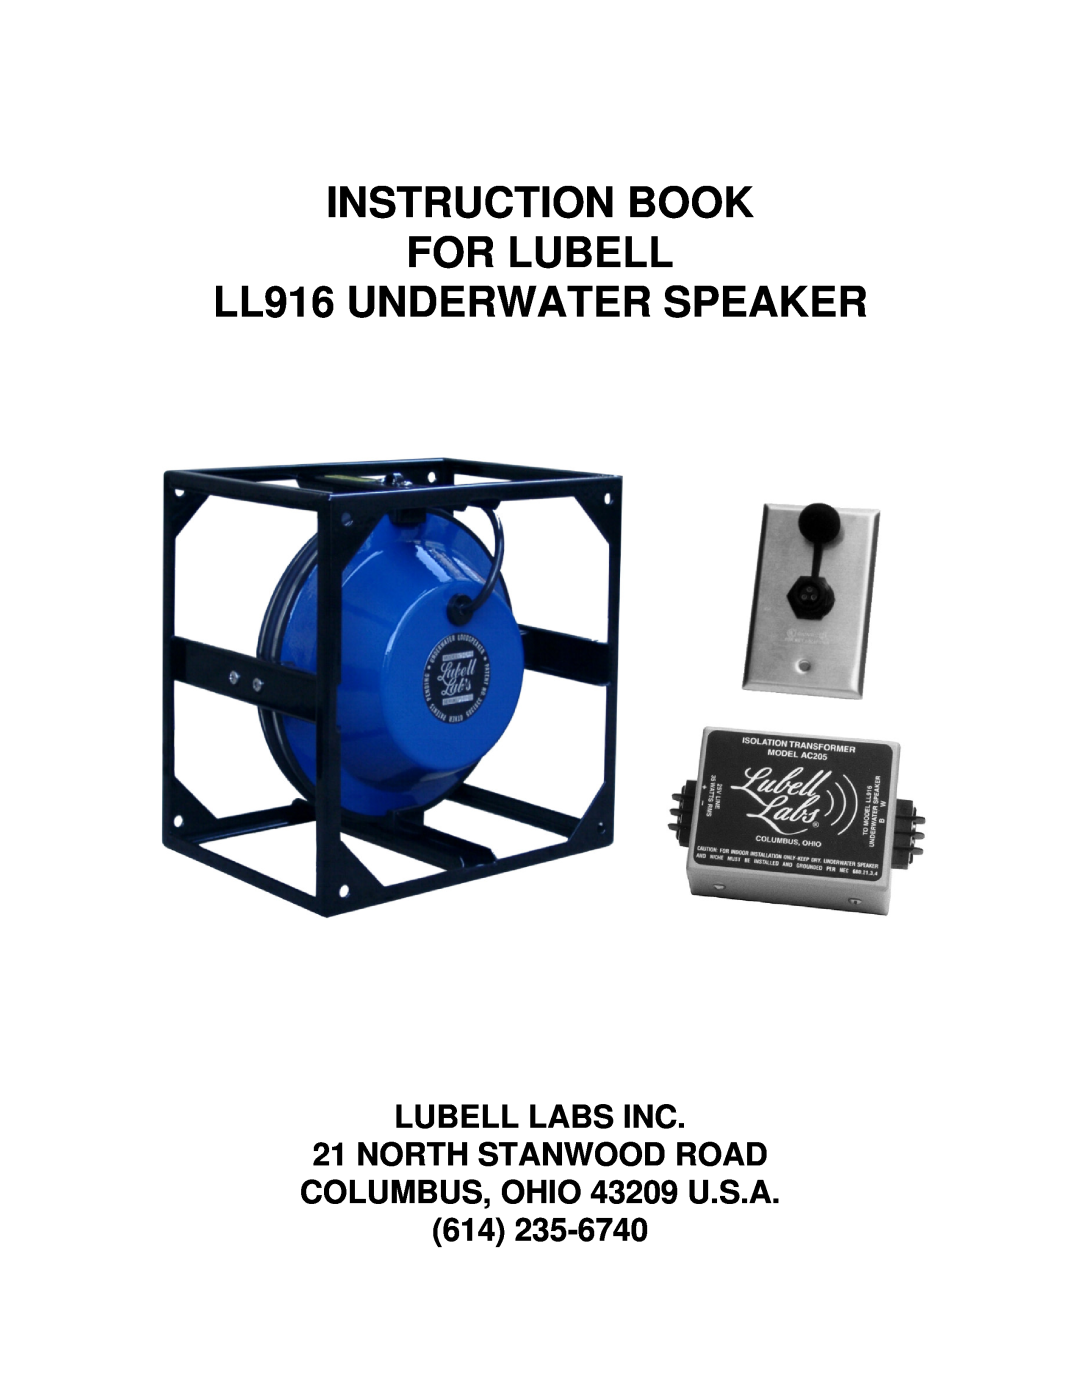 Peavey manual INSTRUCTION BOOK FOR LUBELL LL916 UNDERWATER SPEAKER 